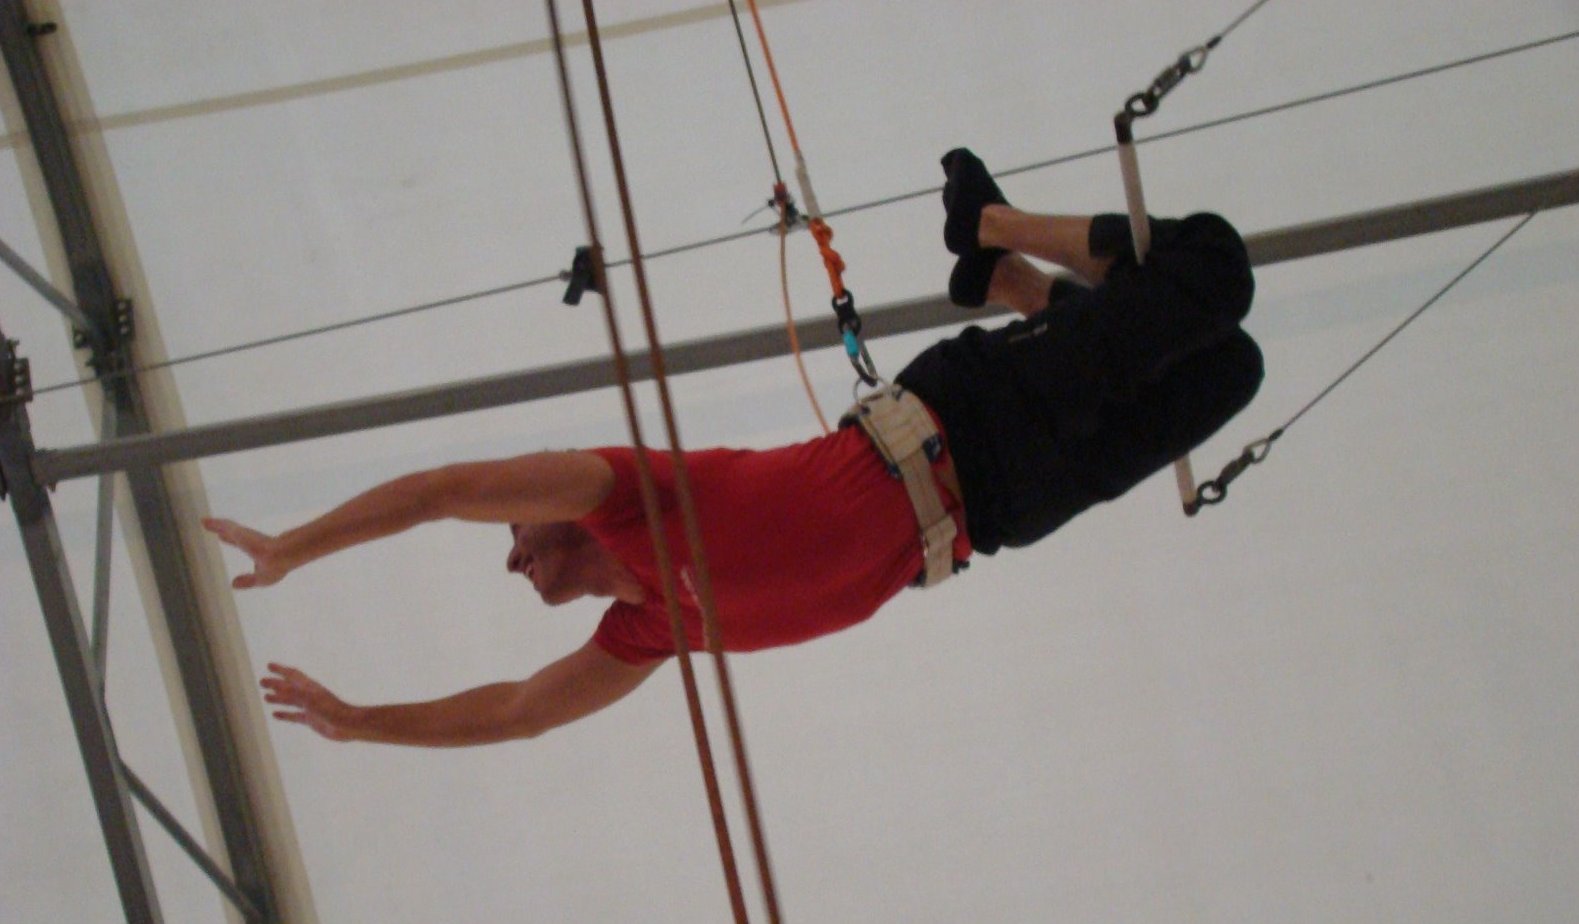  Rick learning how to trapeze. 